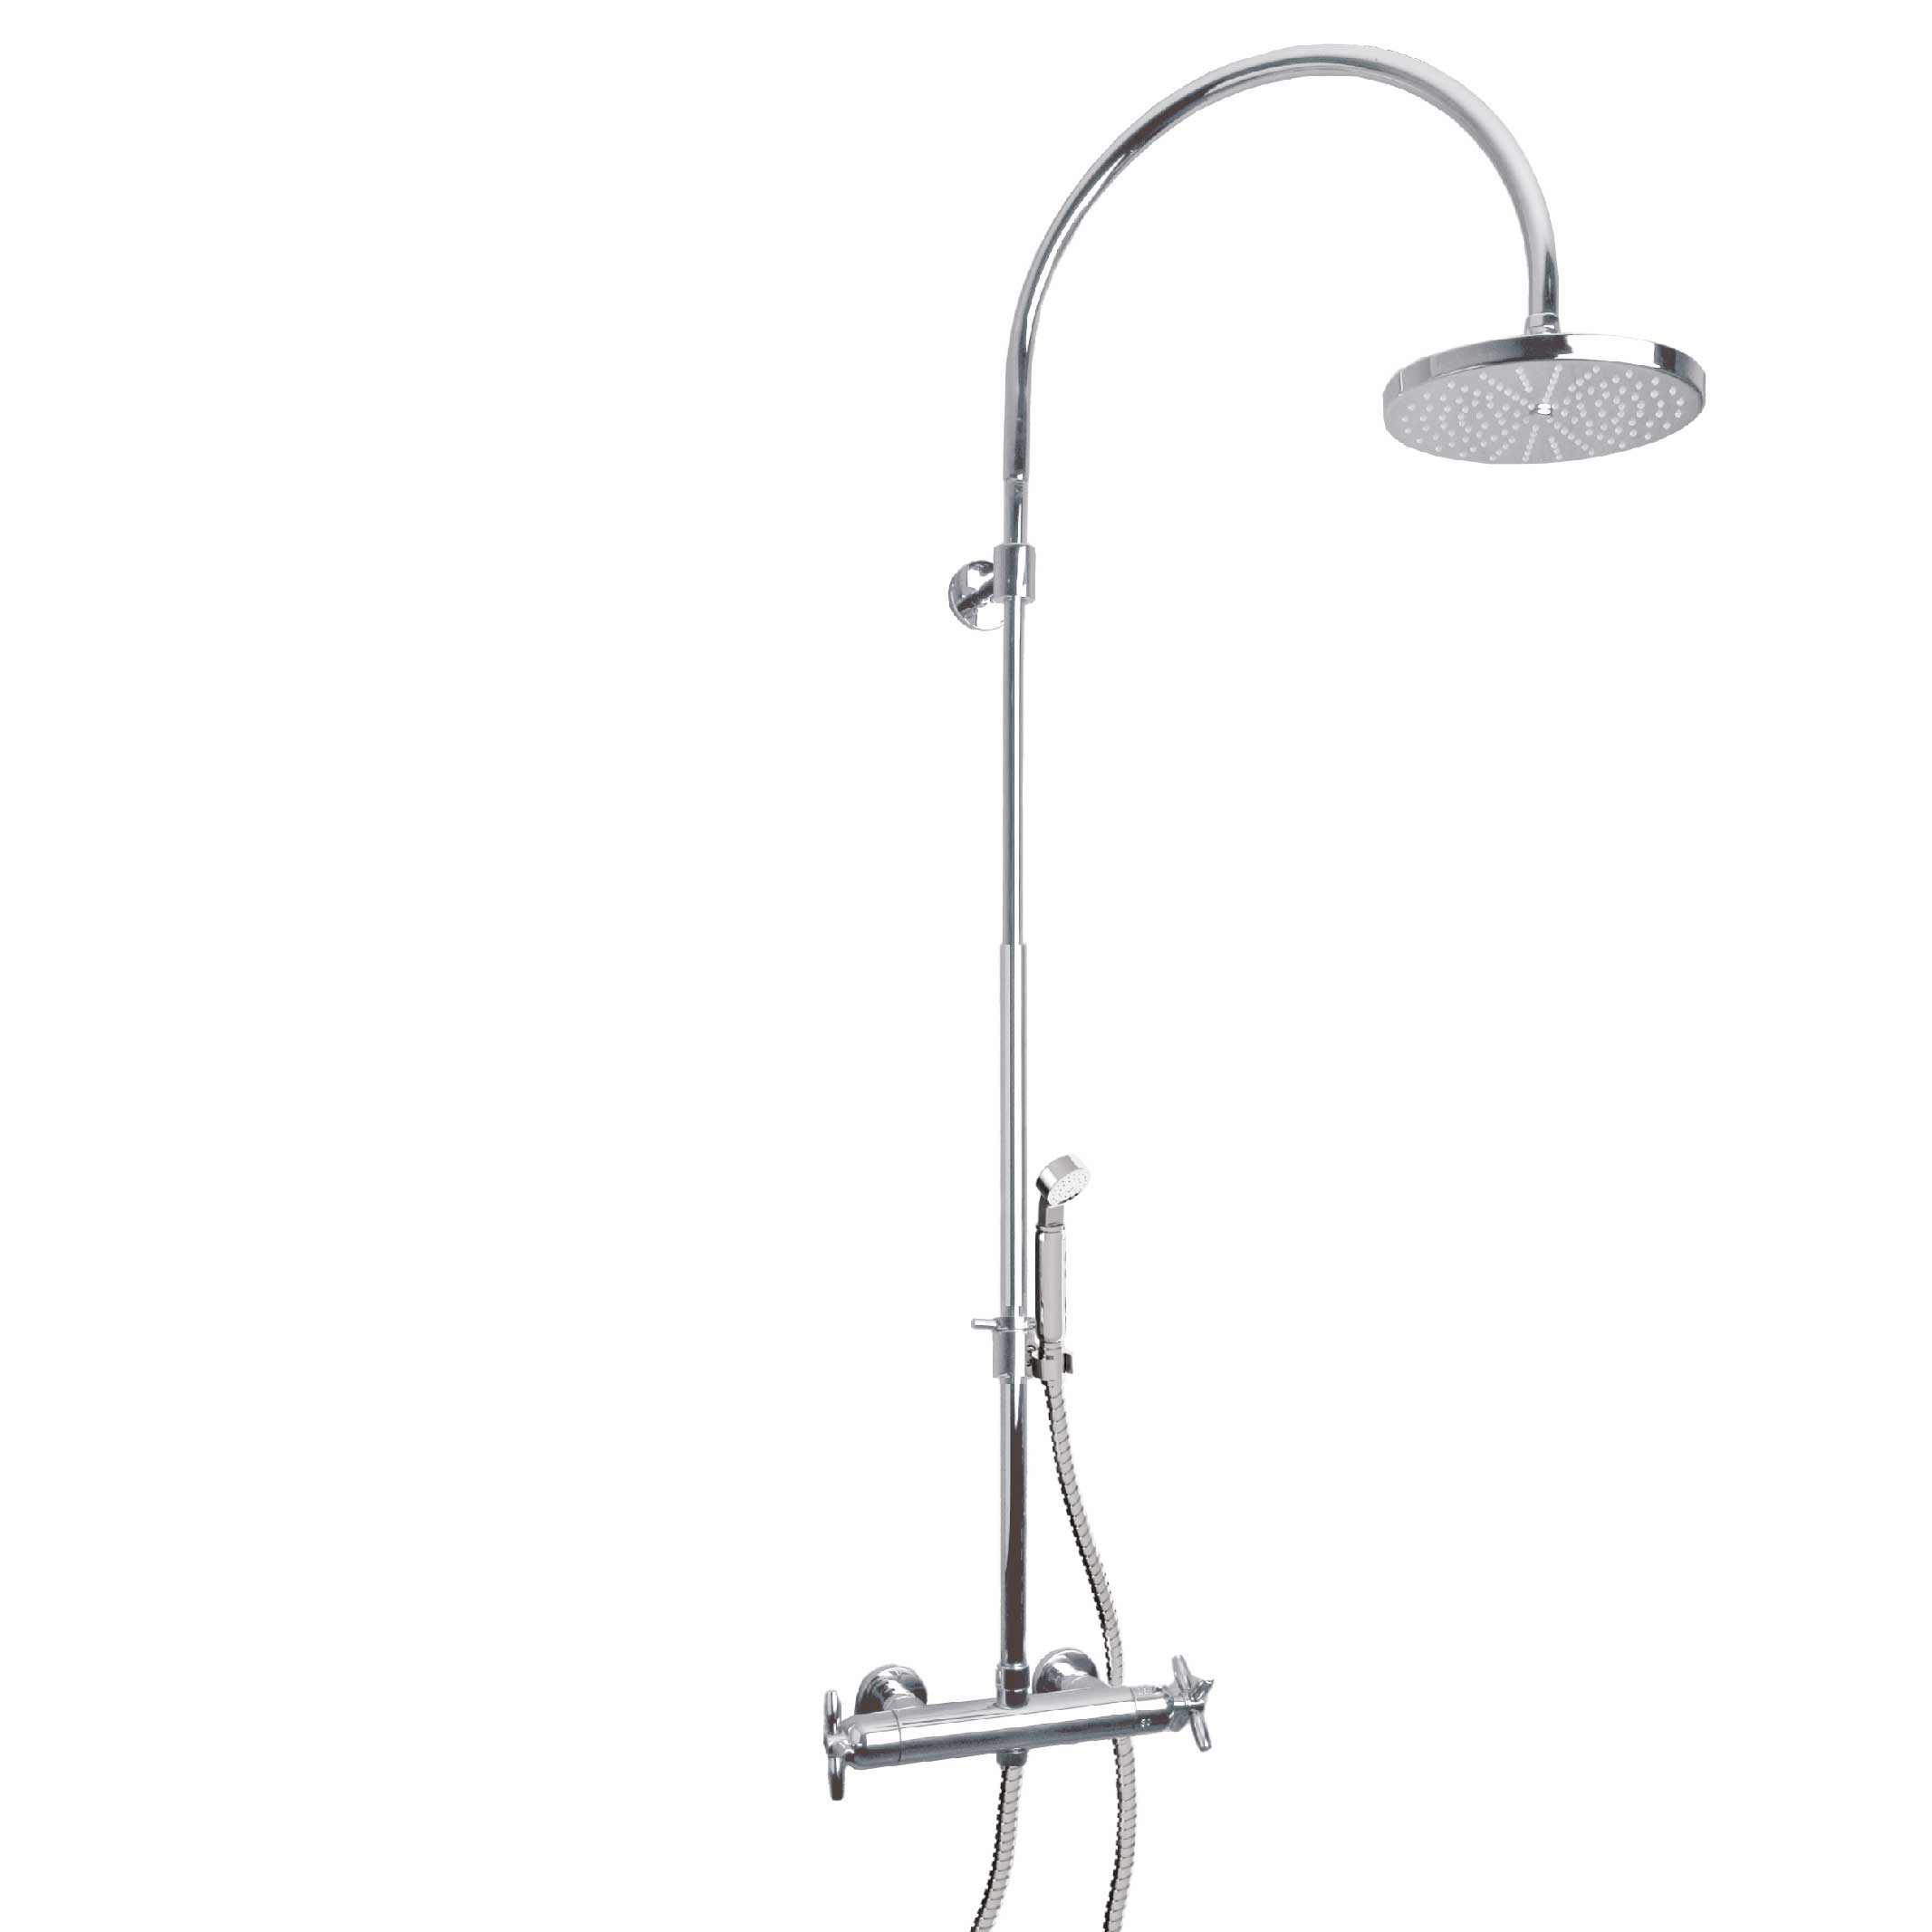 M50-2204T Thermo. shower mixer with column, anti-scaling